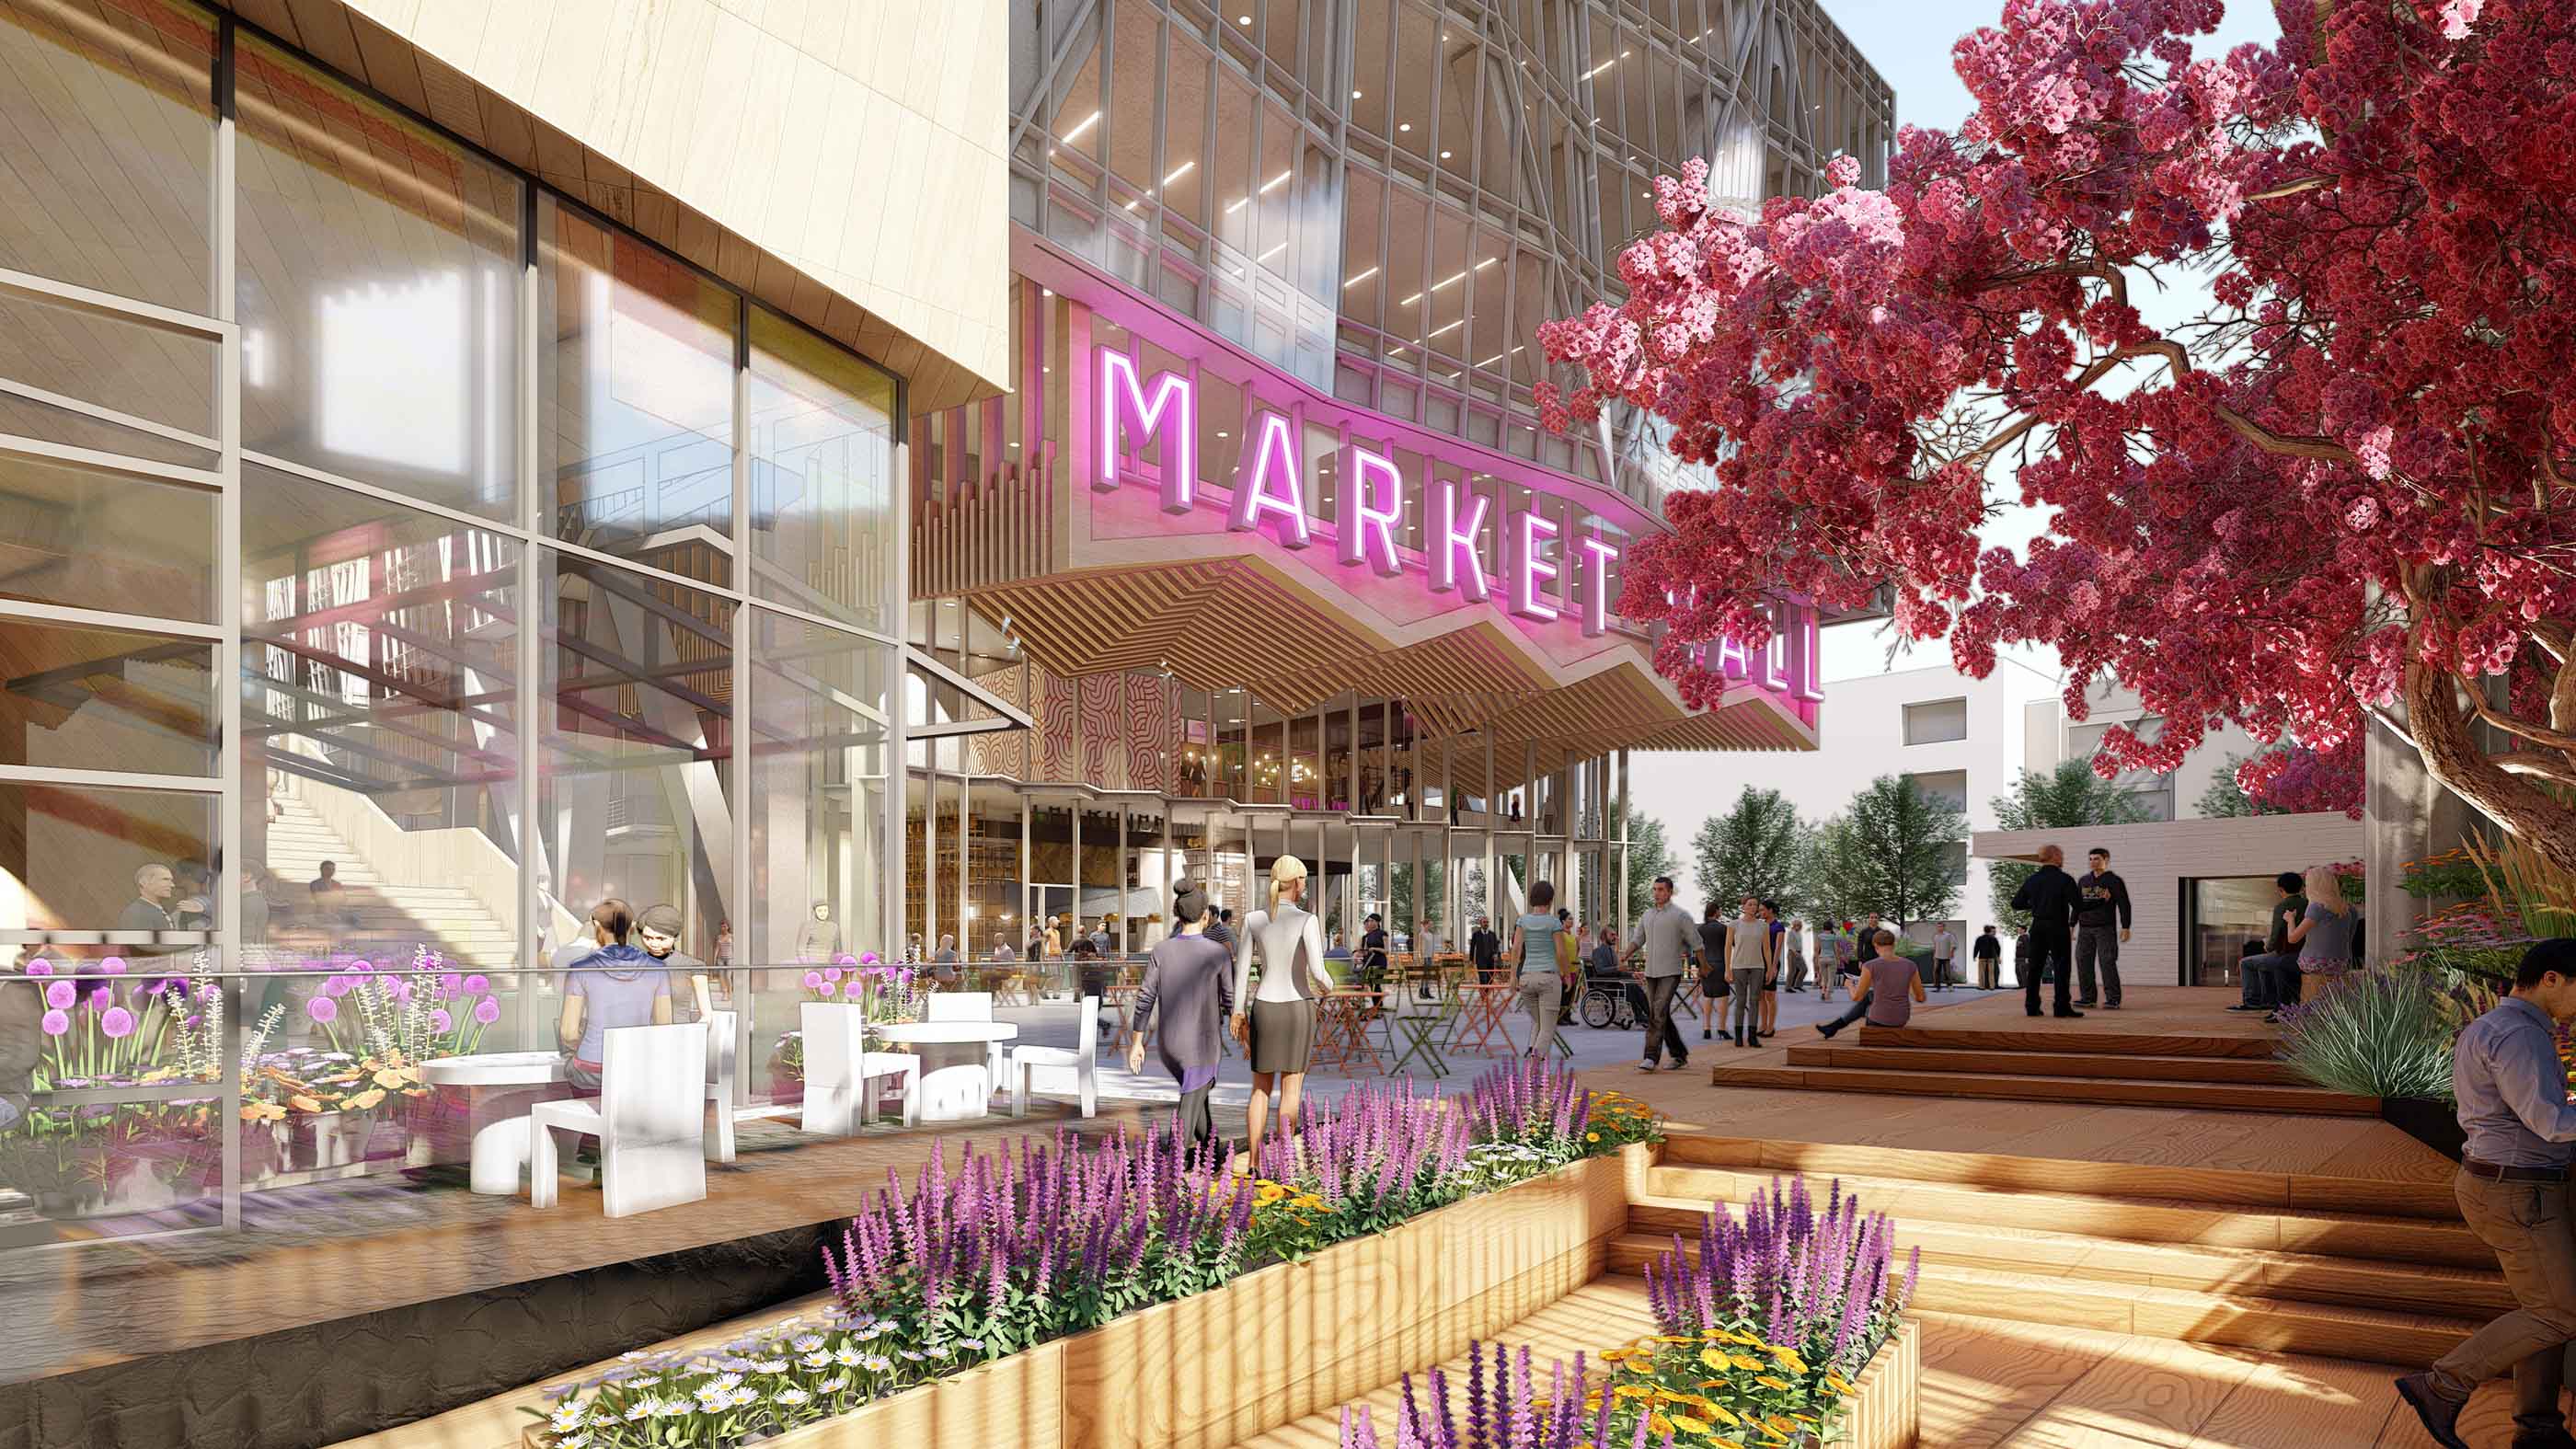 market exterior entrance with pink sign, trees, and plants